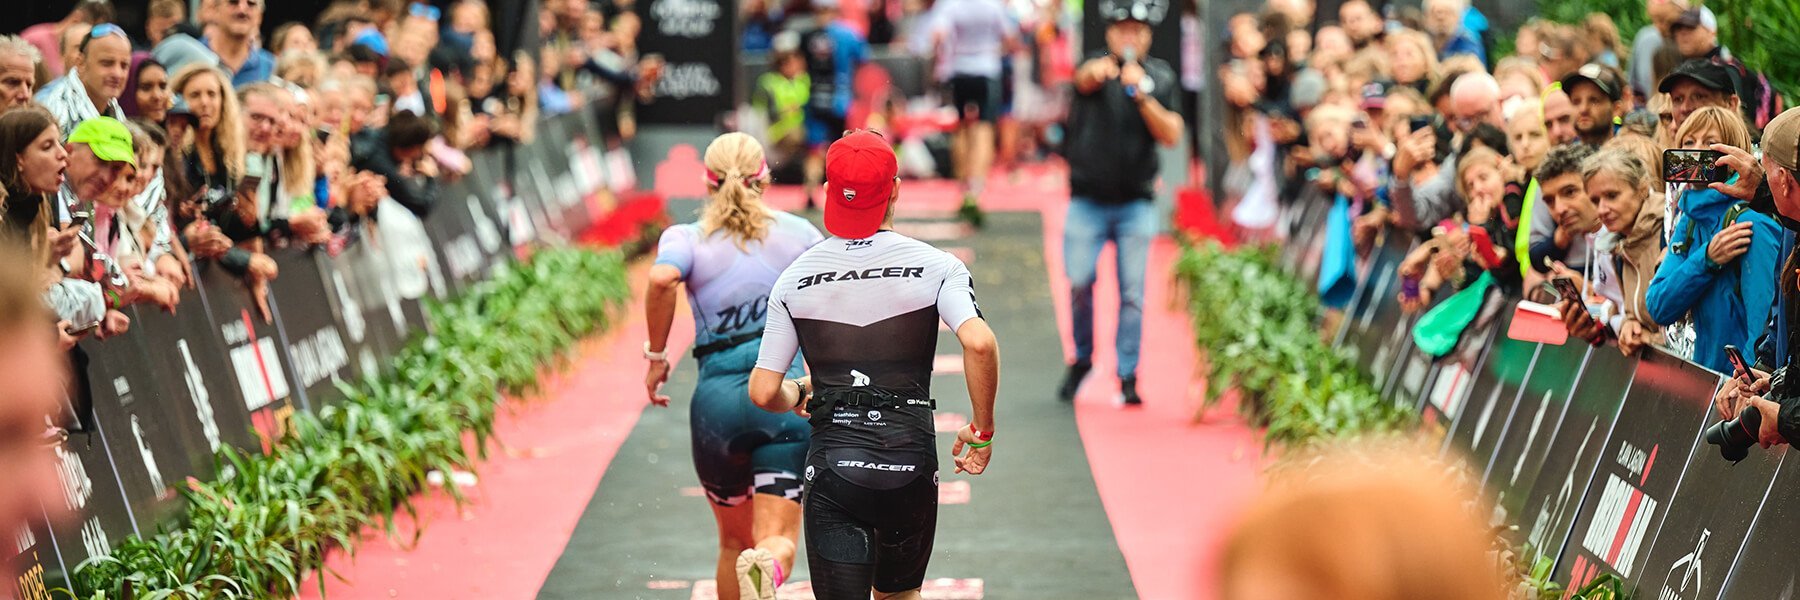 Two athletes running to the Finish Line cheered on by supporters at Plava Laguna IRONMAN 70.3 Porec Croatia